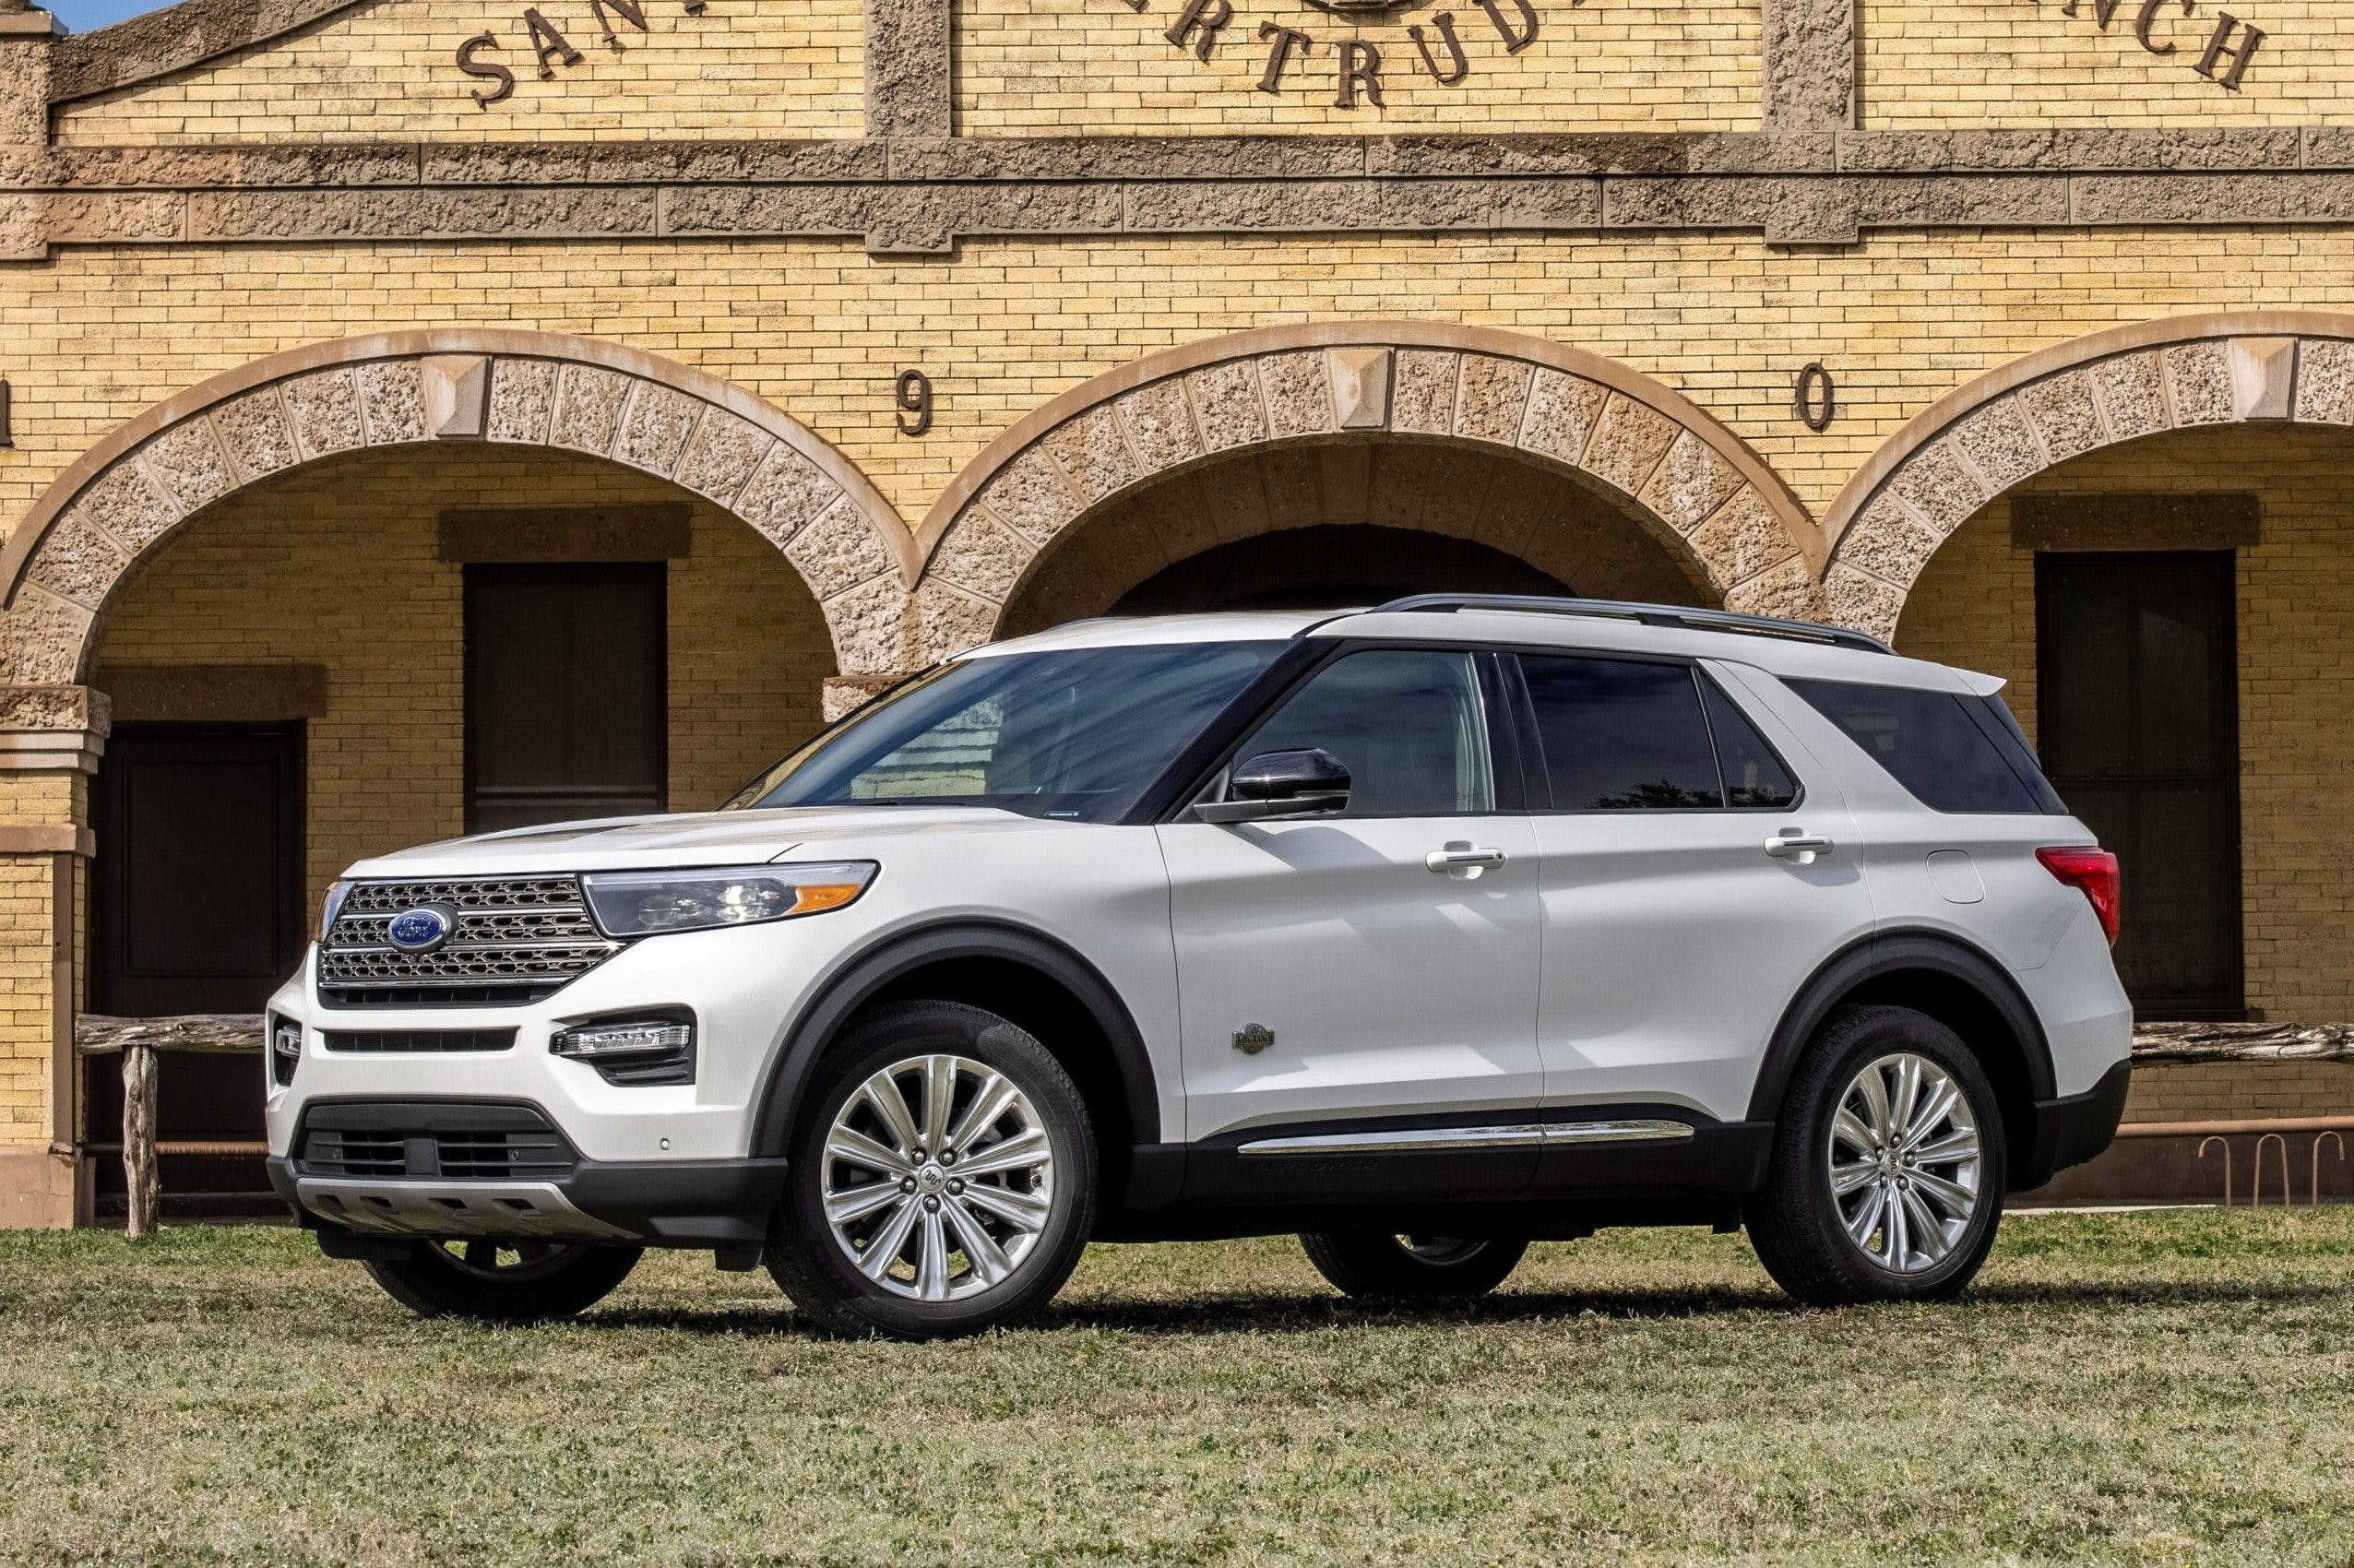 The Ultimate Guide to Finding the Best Gas Mileage SUV with 3rd Row